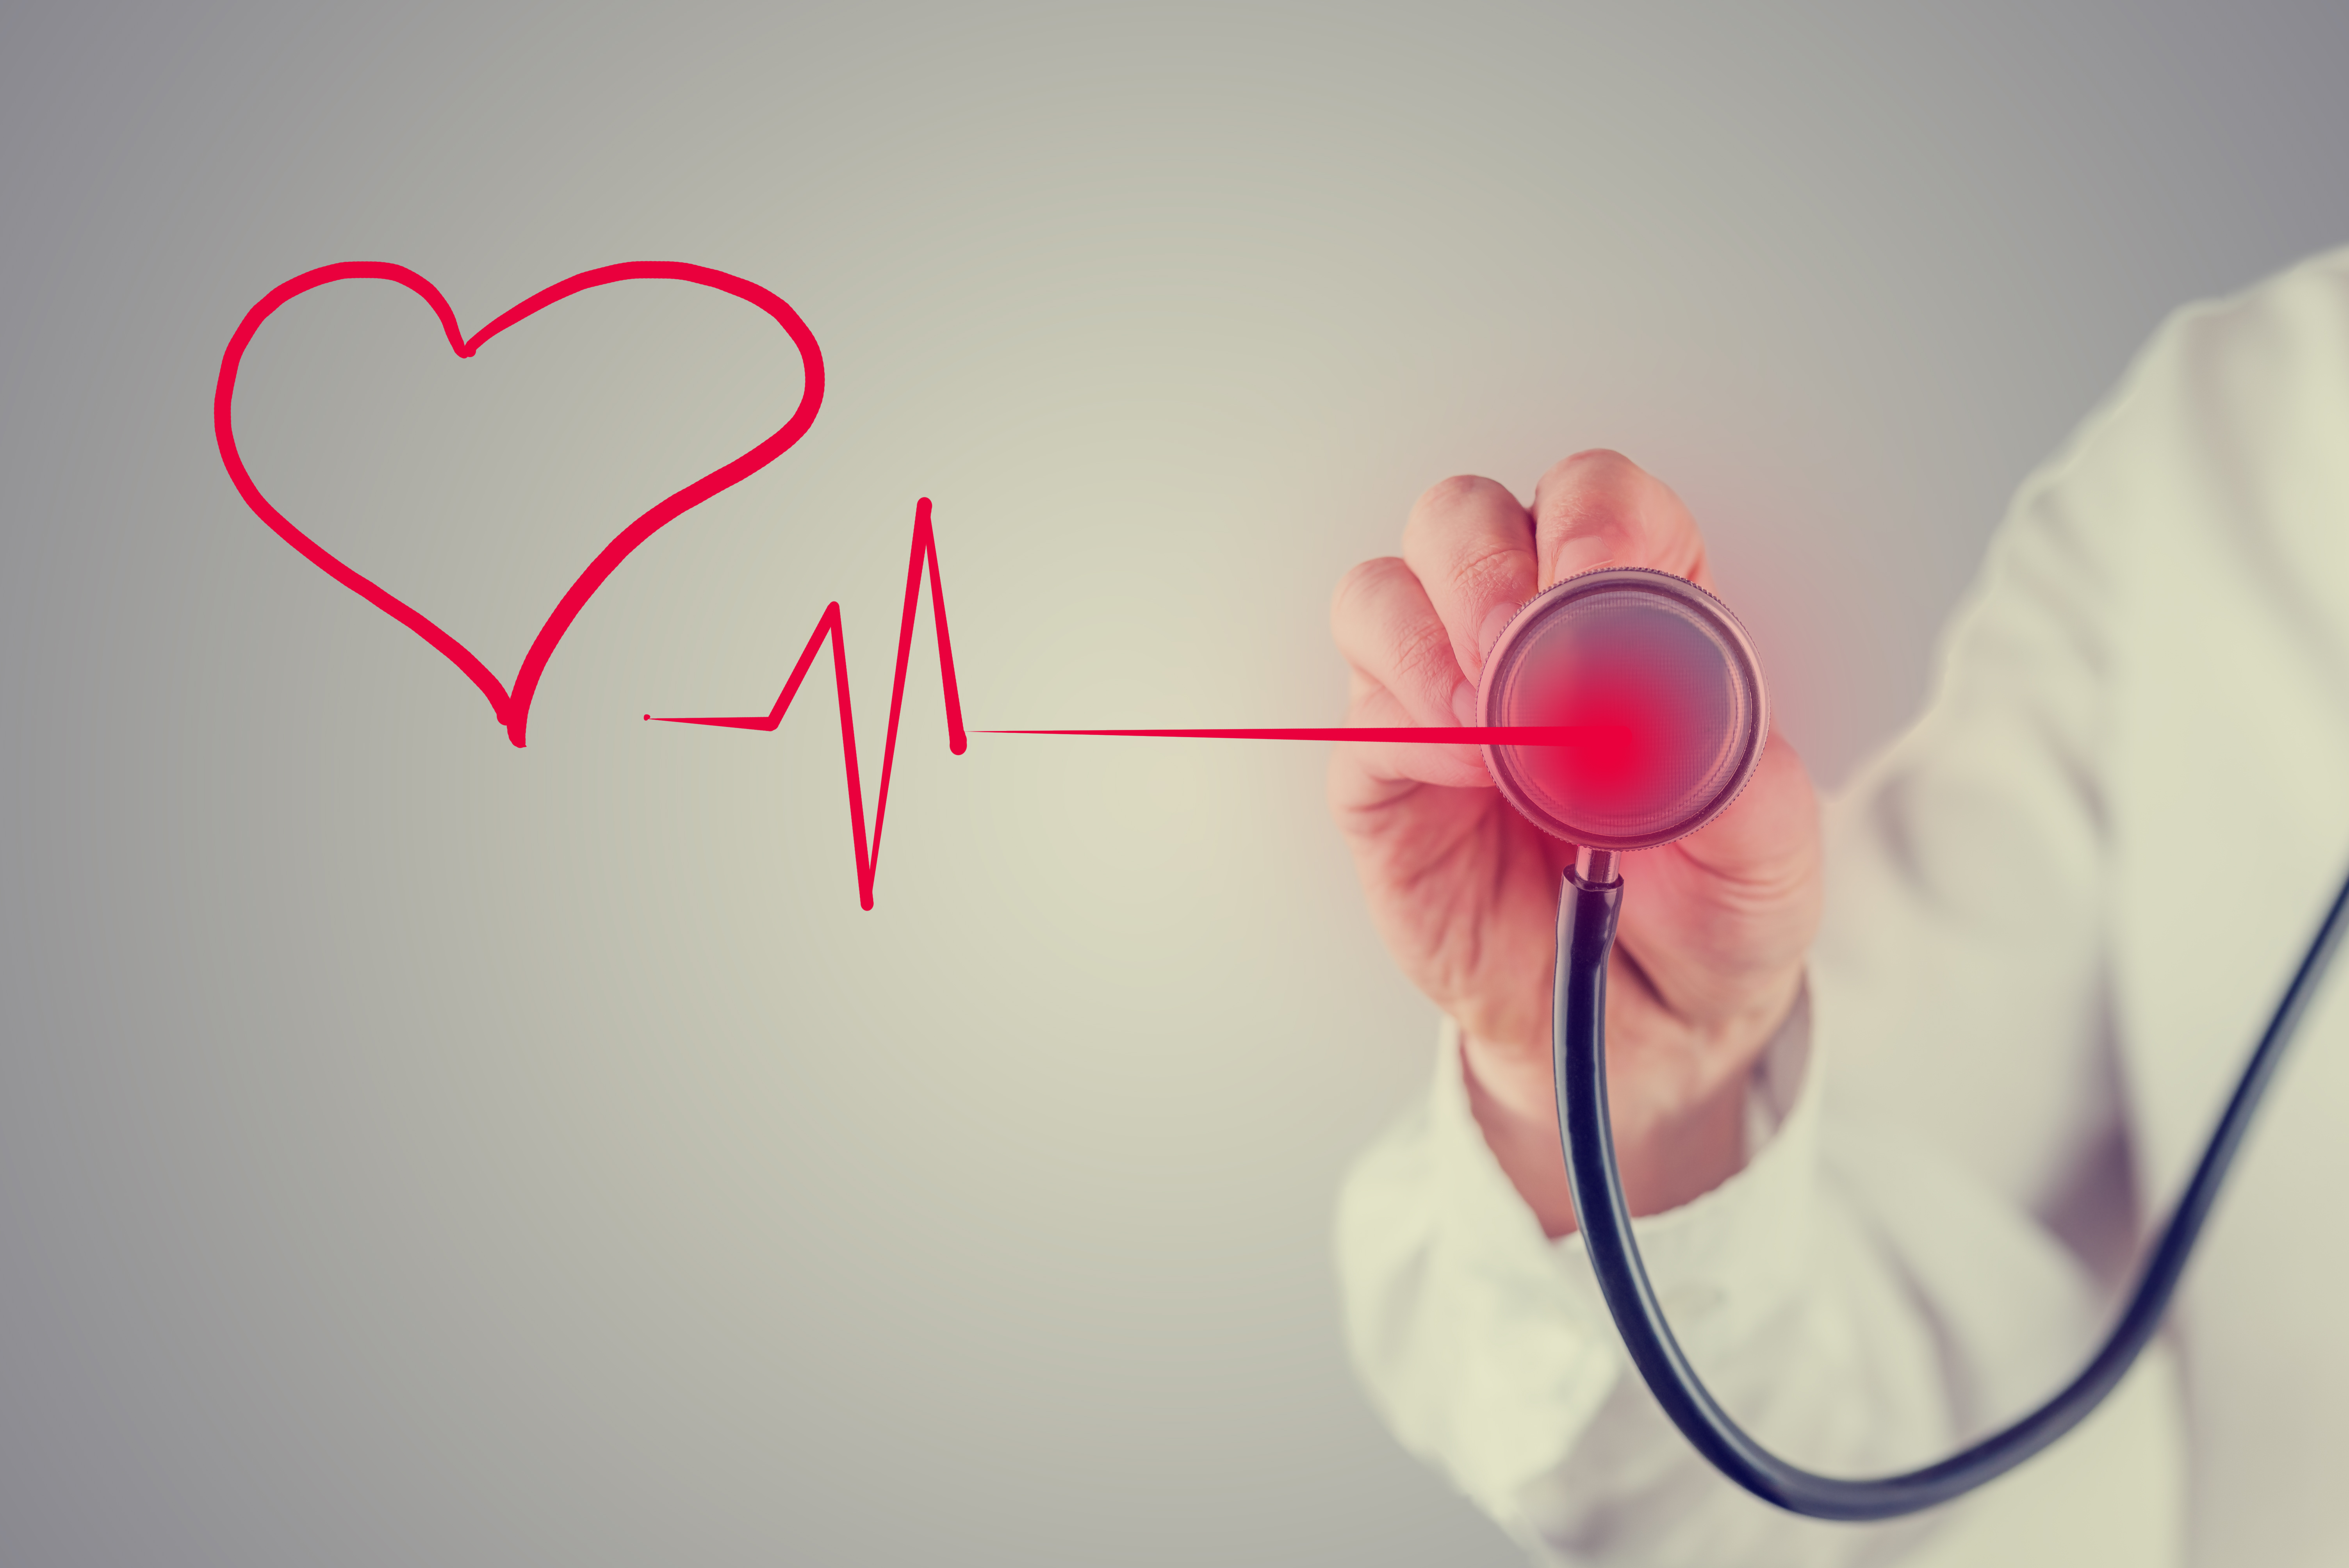 Retro faded effect image of a healthy heart and cardiology concept with a hand-drawn red heart linked to the disc of a stethoscope by a heartbeat tracing as a doctor listens to the sound.